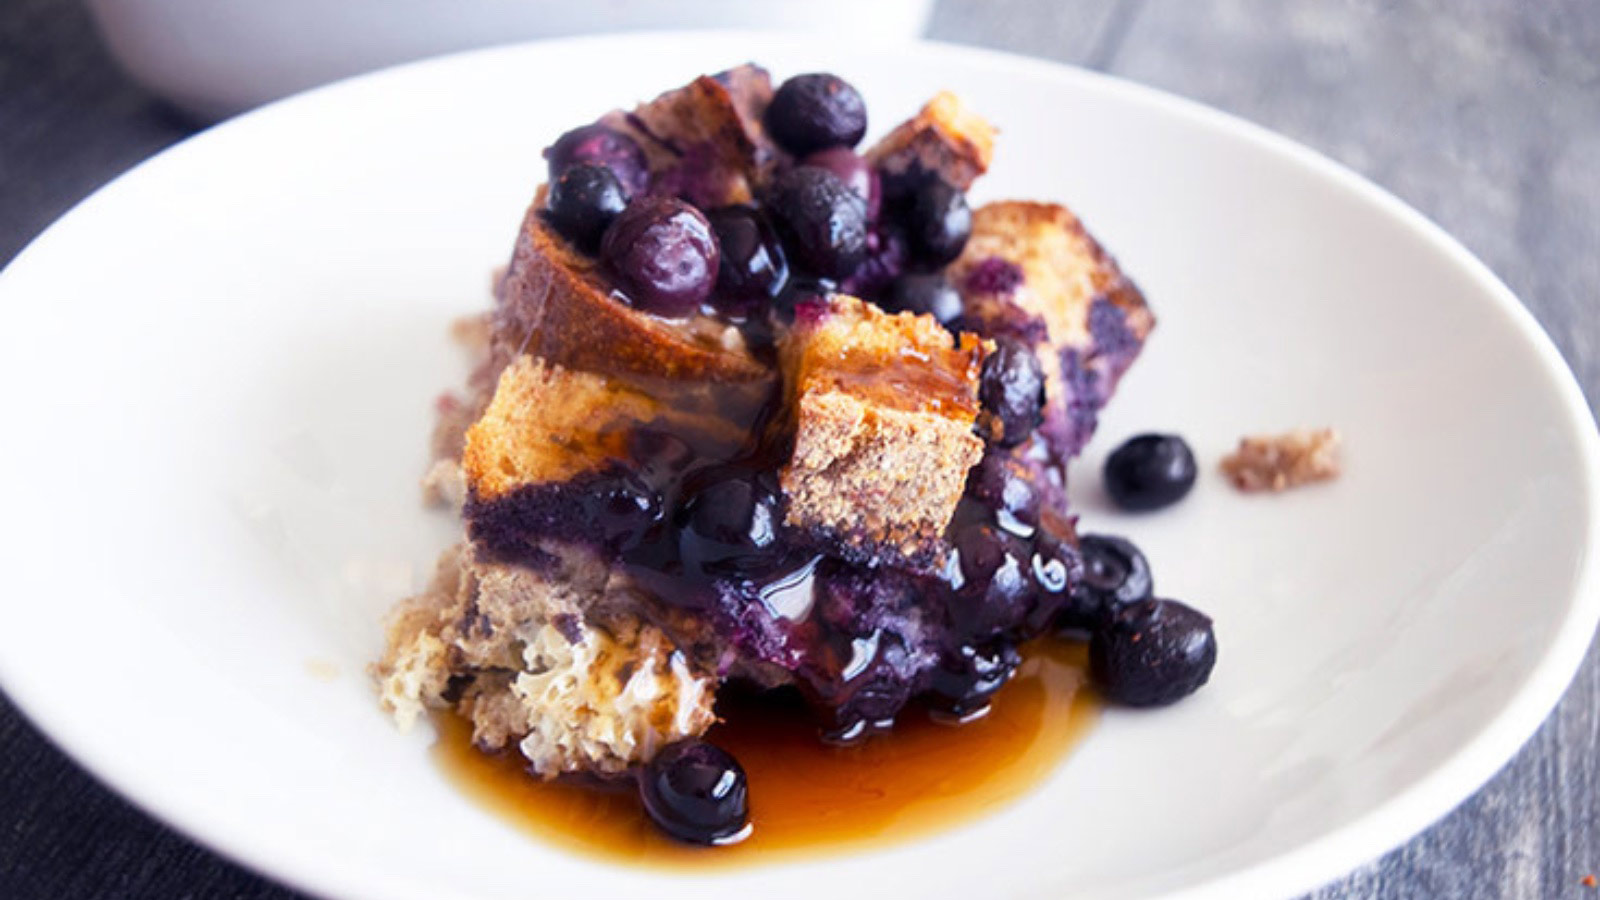 The finished Blueberry French Toast Casserole and a portion served on a plate.